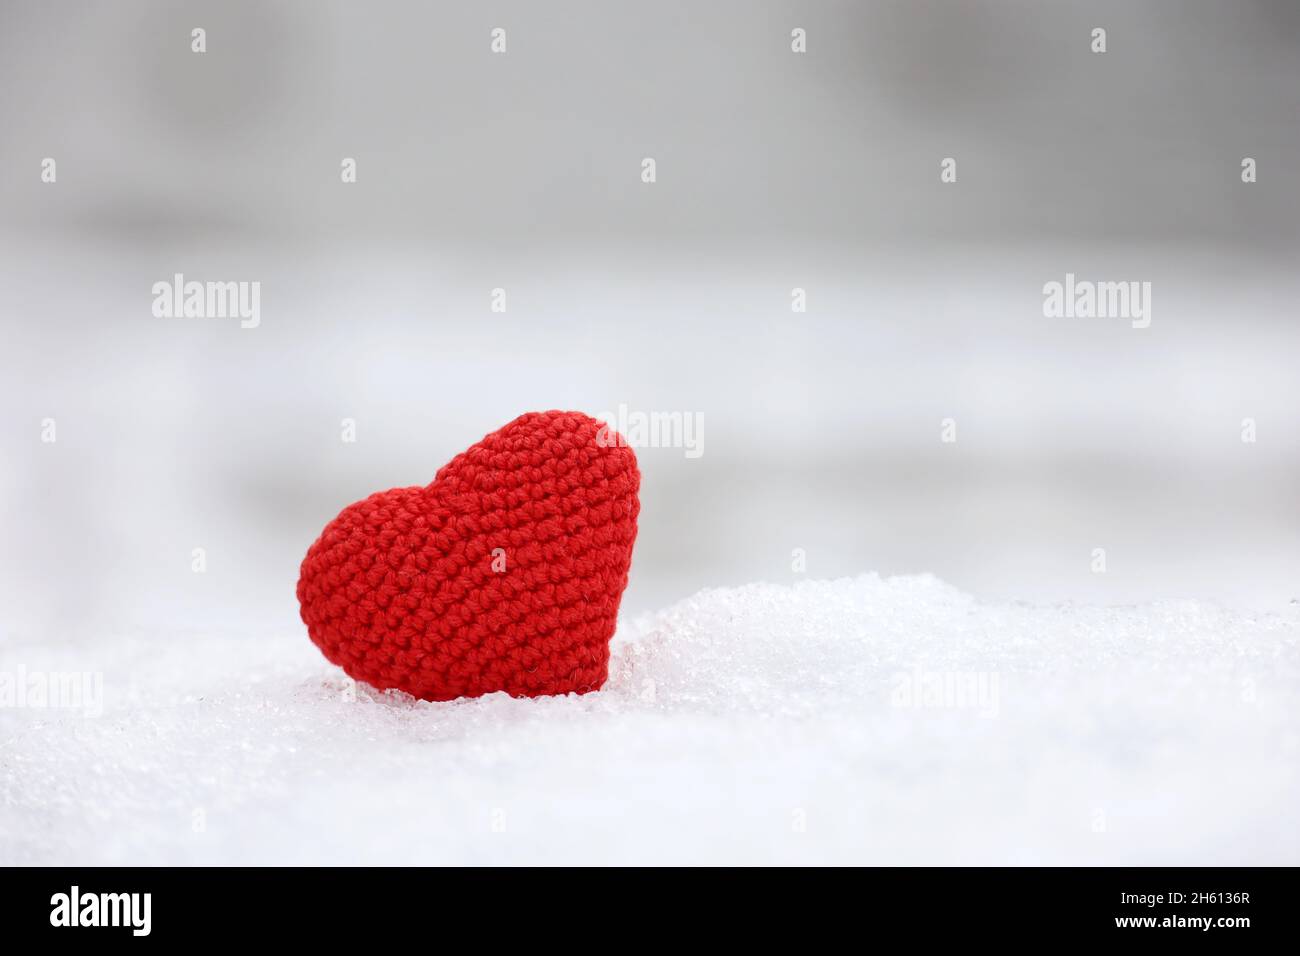 Red knitted heart in the snow with blurred nature background. Valentine's card, symbol of love, romantic event at winter, Christmas celebration Stock Photo